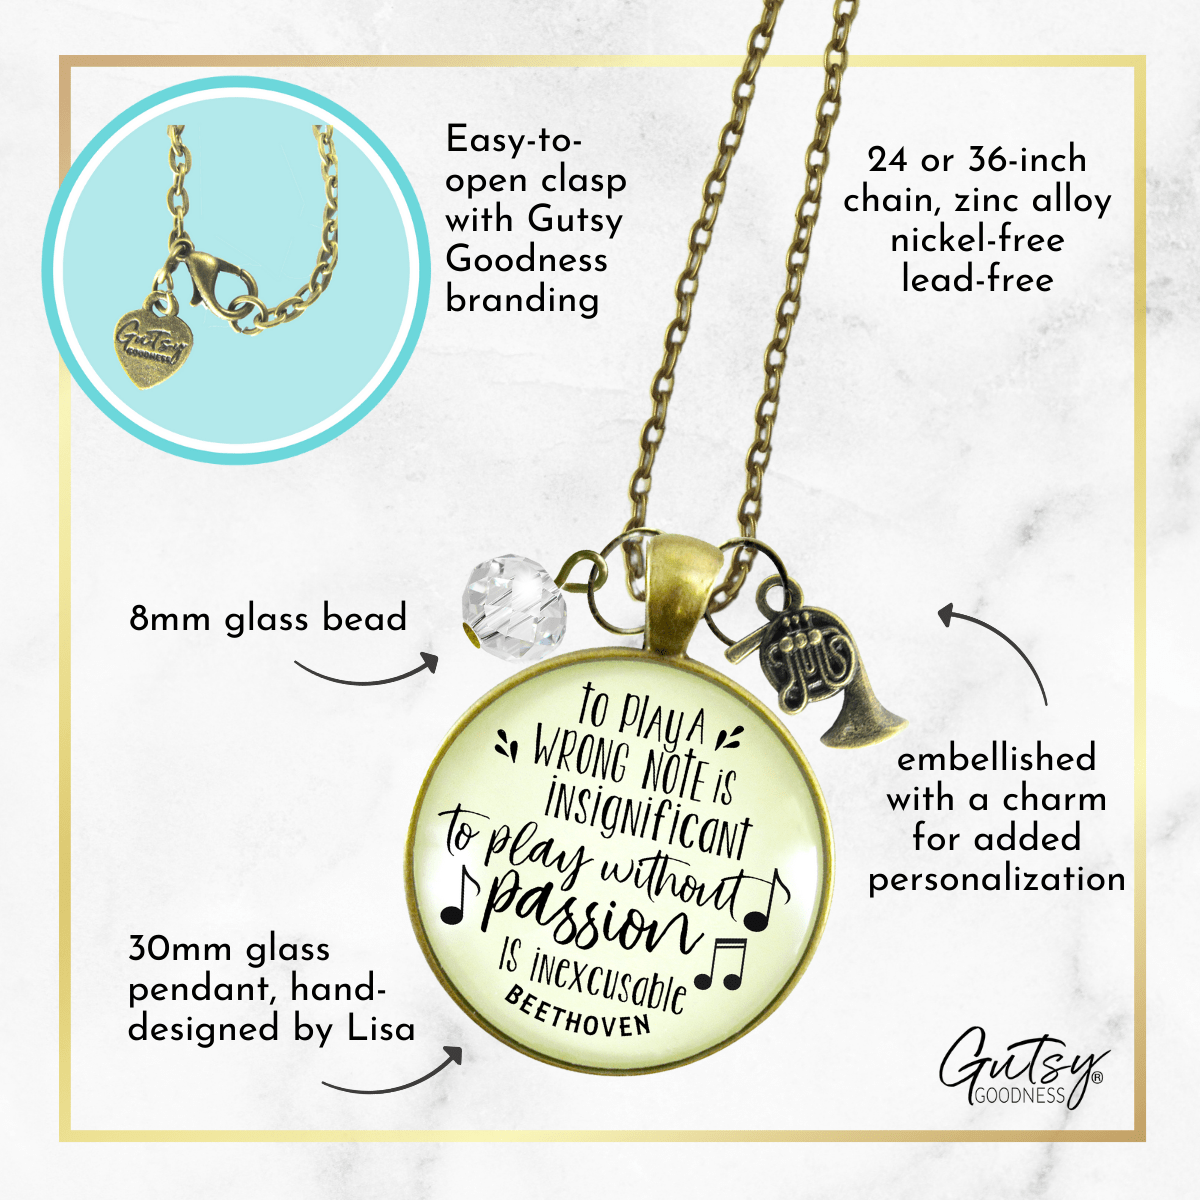 Gutsy Goodness French Horn Necklace To Play Wrong Note Beethoven Quote Music Teacher - Gutsy Goodness Handmade Jewelry;French Horn Necklace To Play Wrong Note Beethoven Quote Music Teacher - Gutsy Goodness Handmade Jewelry Gifts